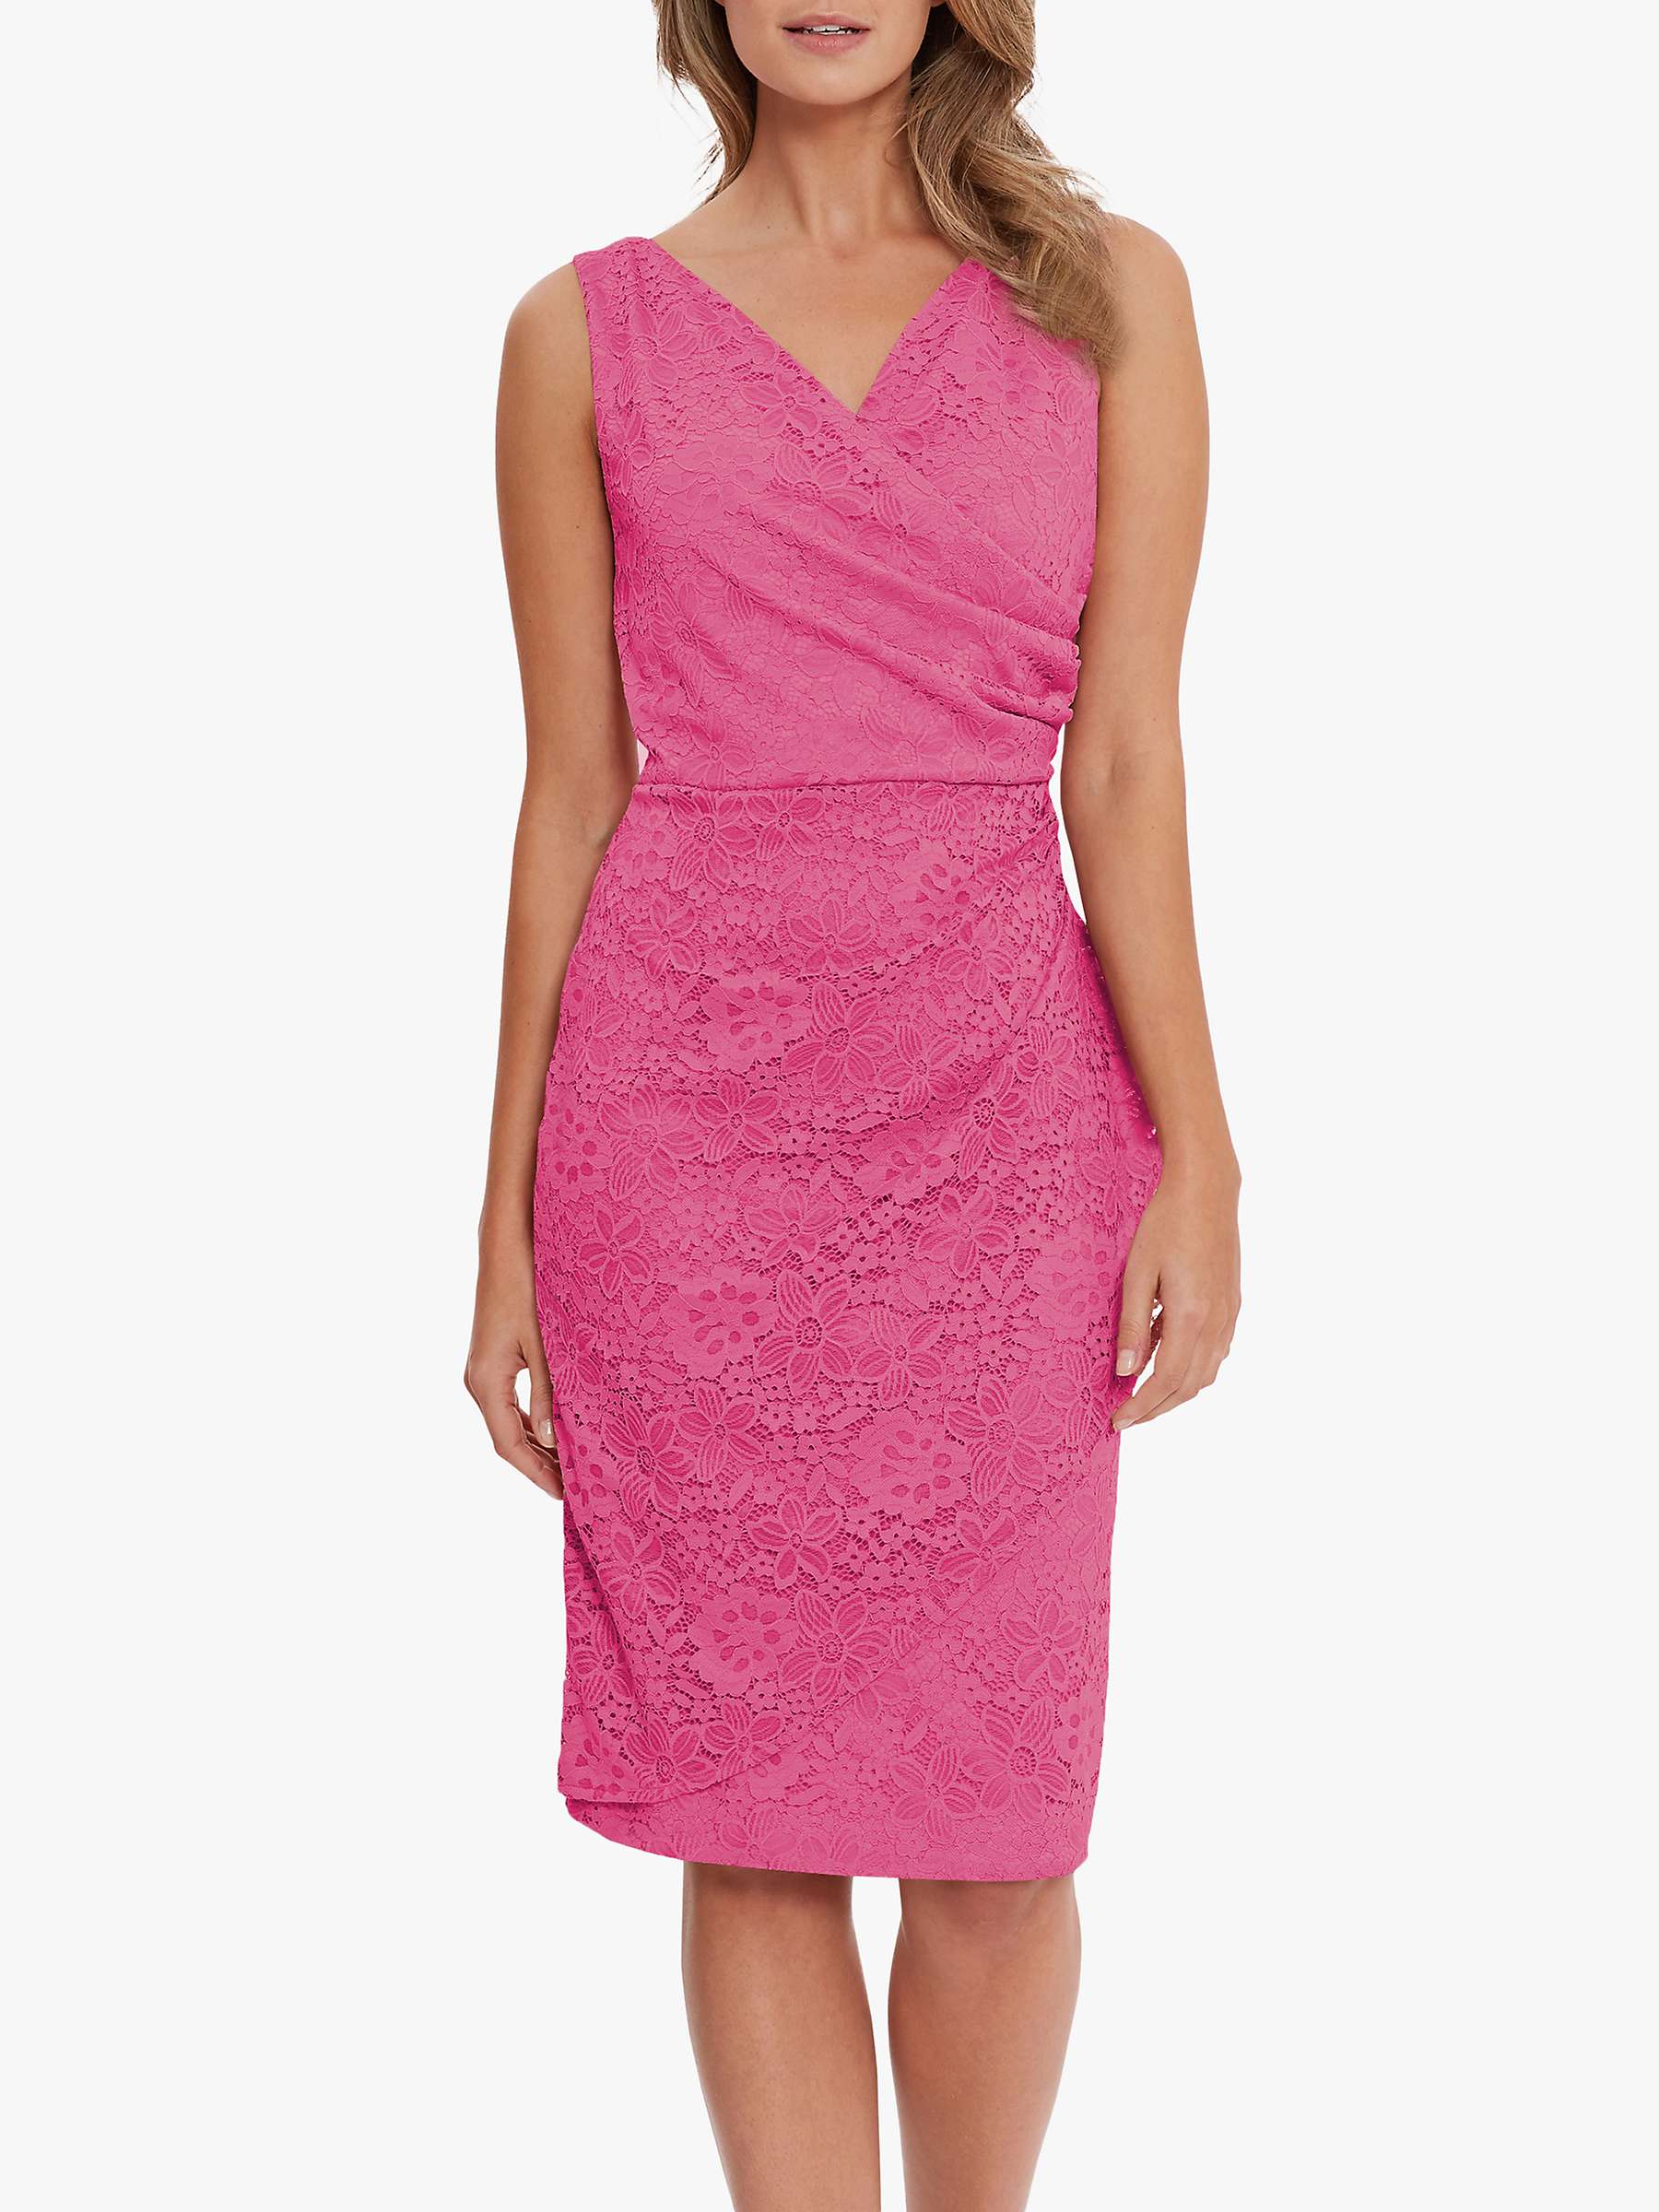 Buy Gina Bacconi Josette Floral Lace Sleeveless Dress Online at johnlewis.com